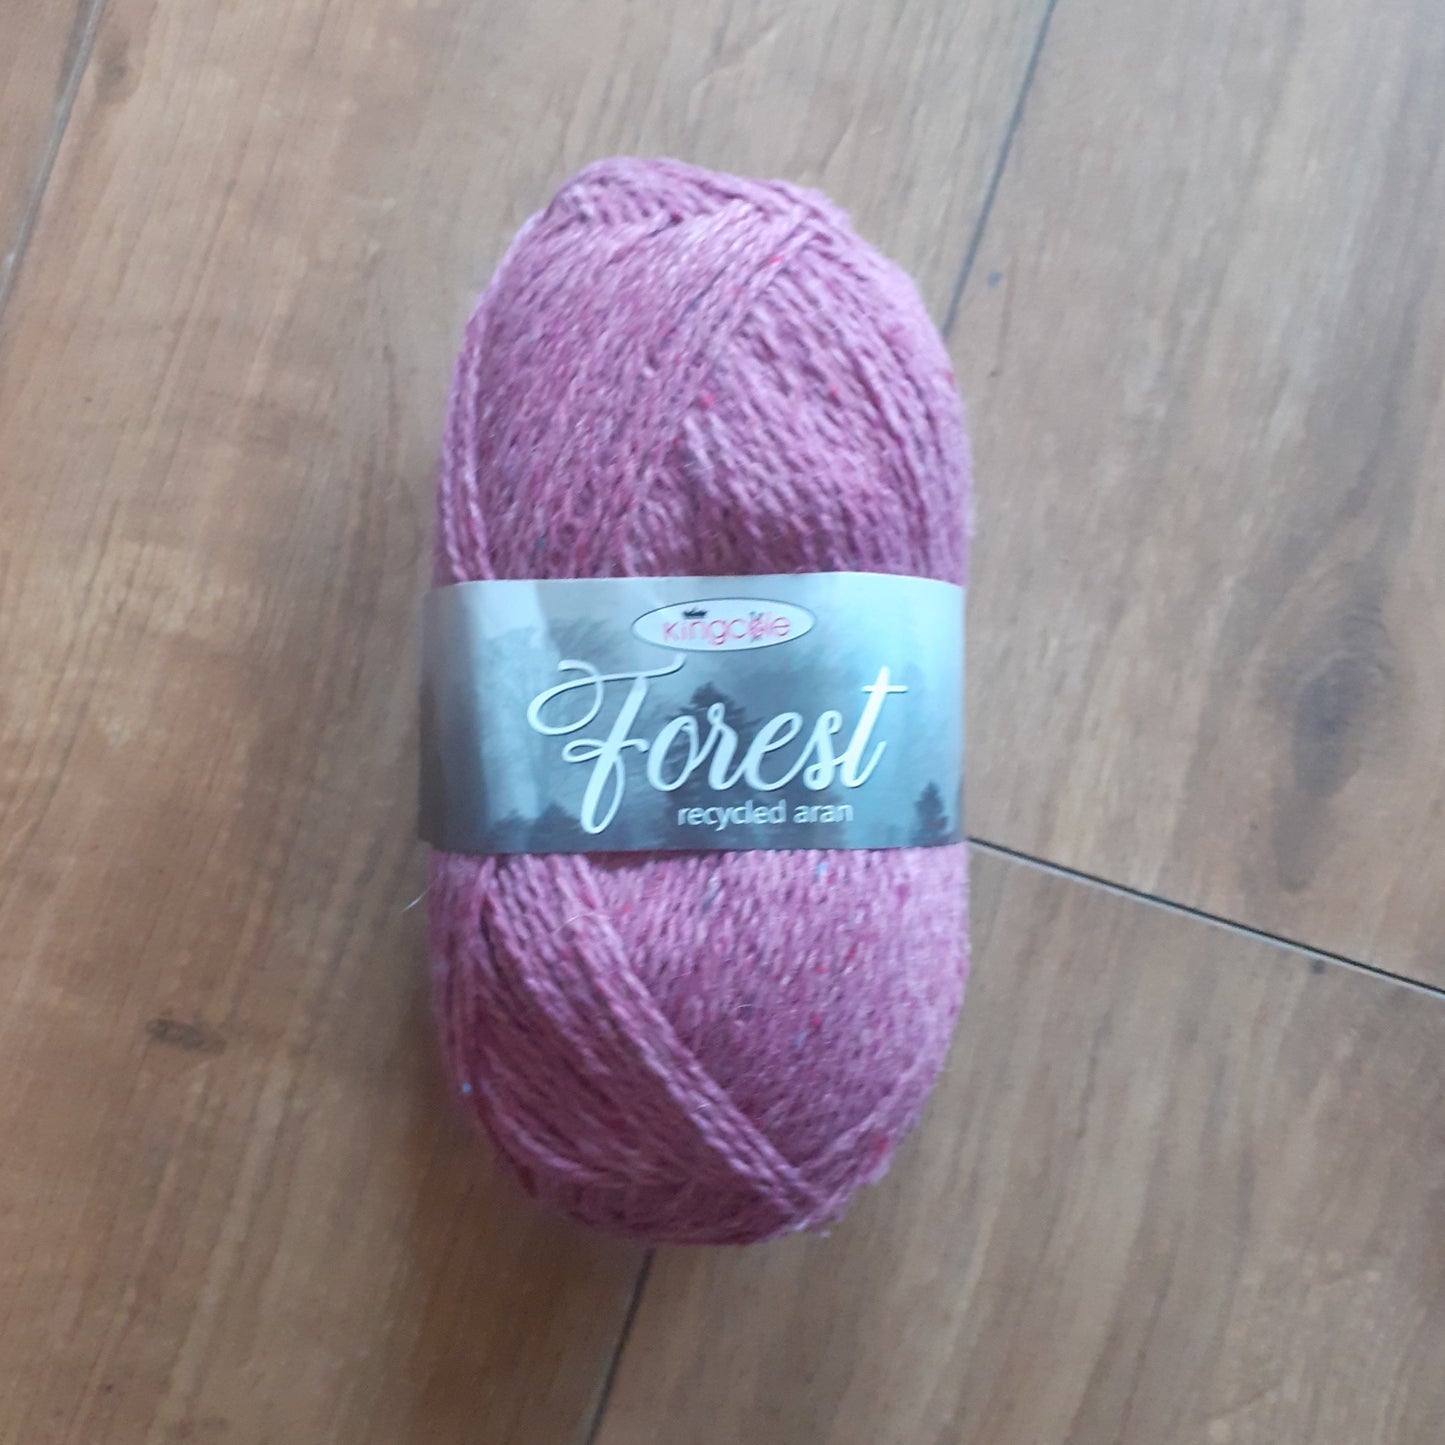 King Cole Forest Aran Wool 100g - Various Shades - CLEARANCE